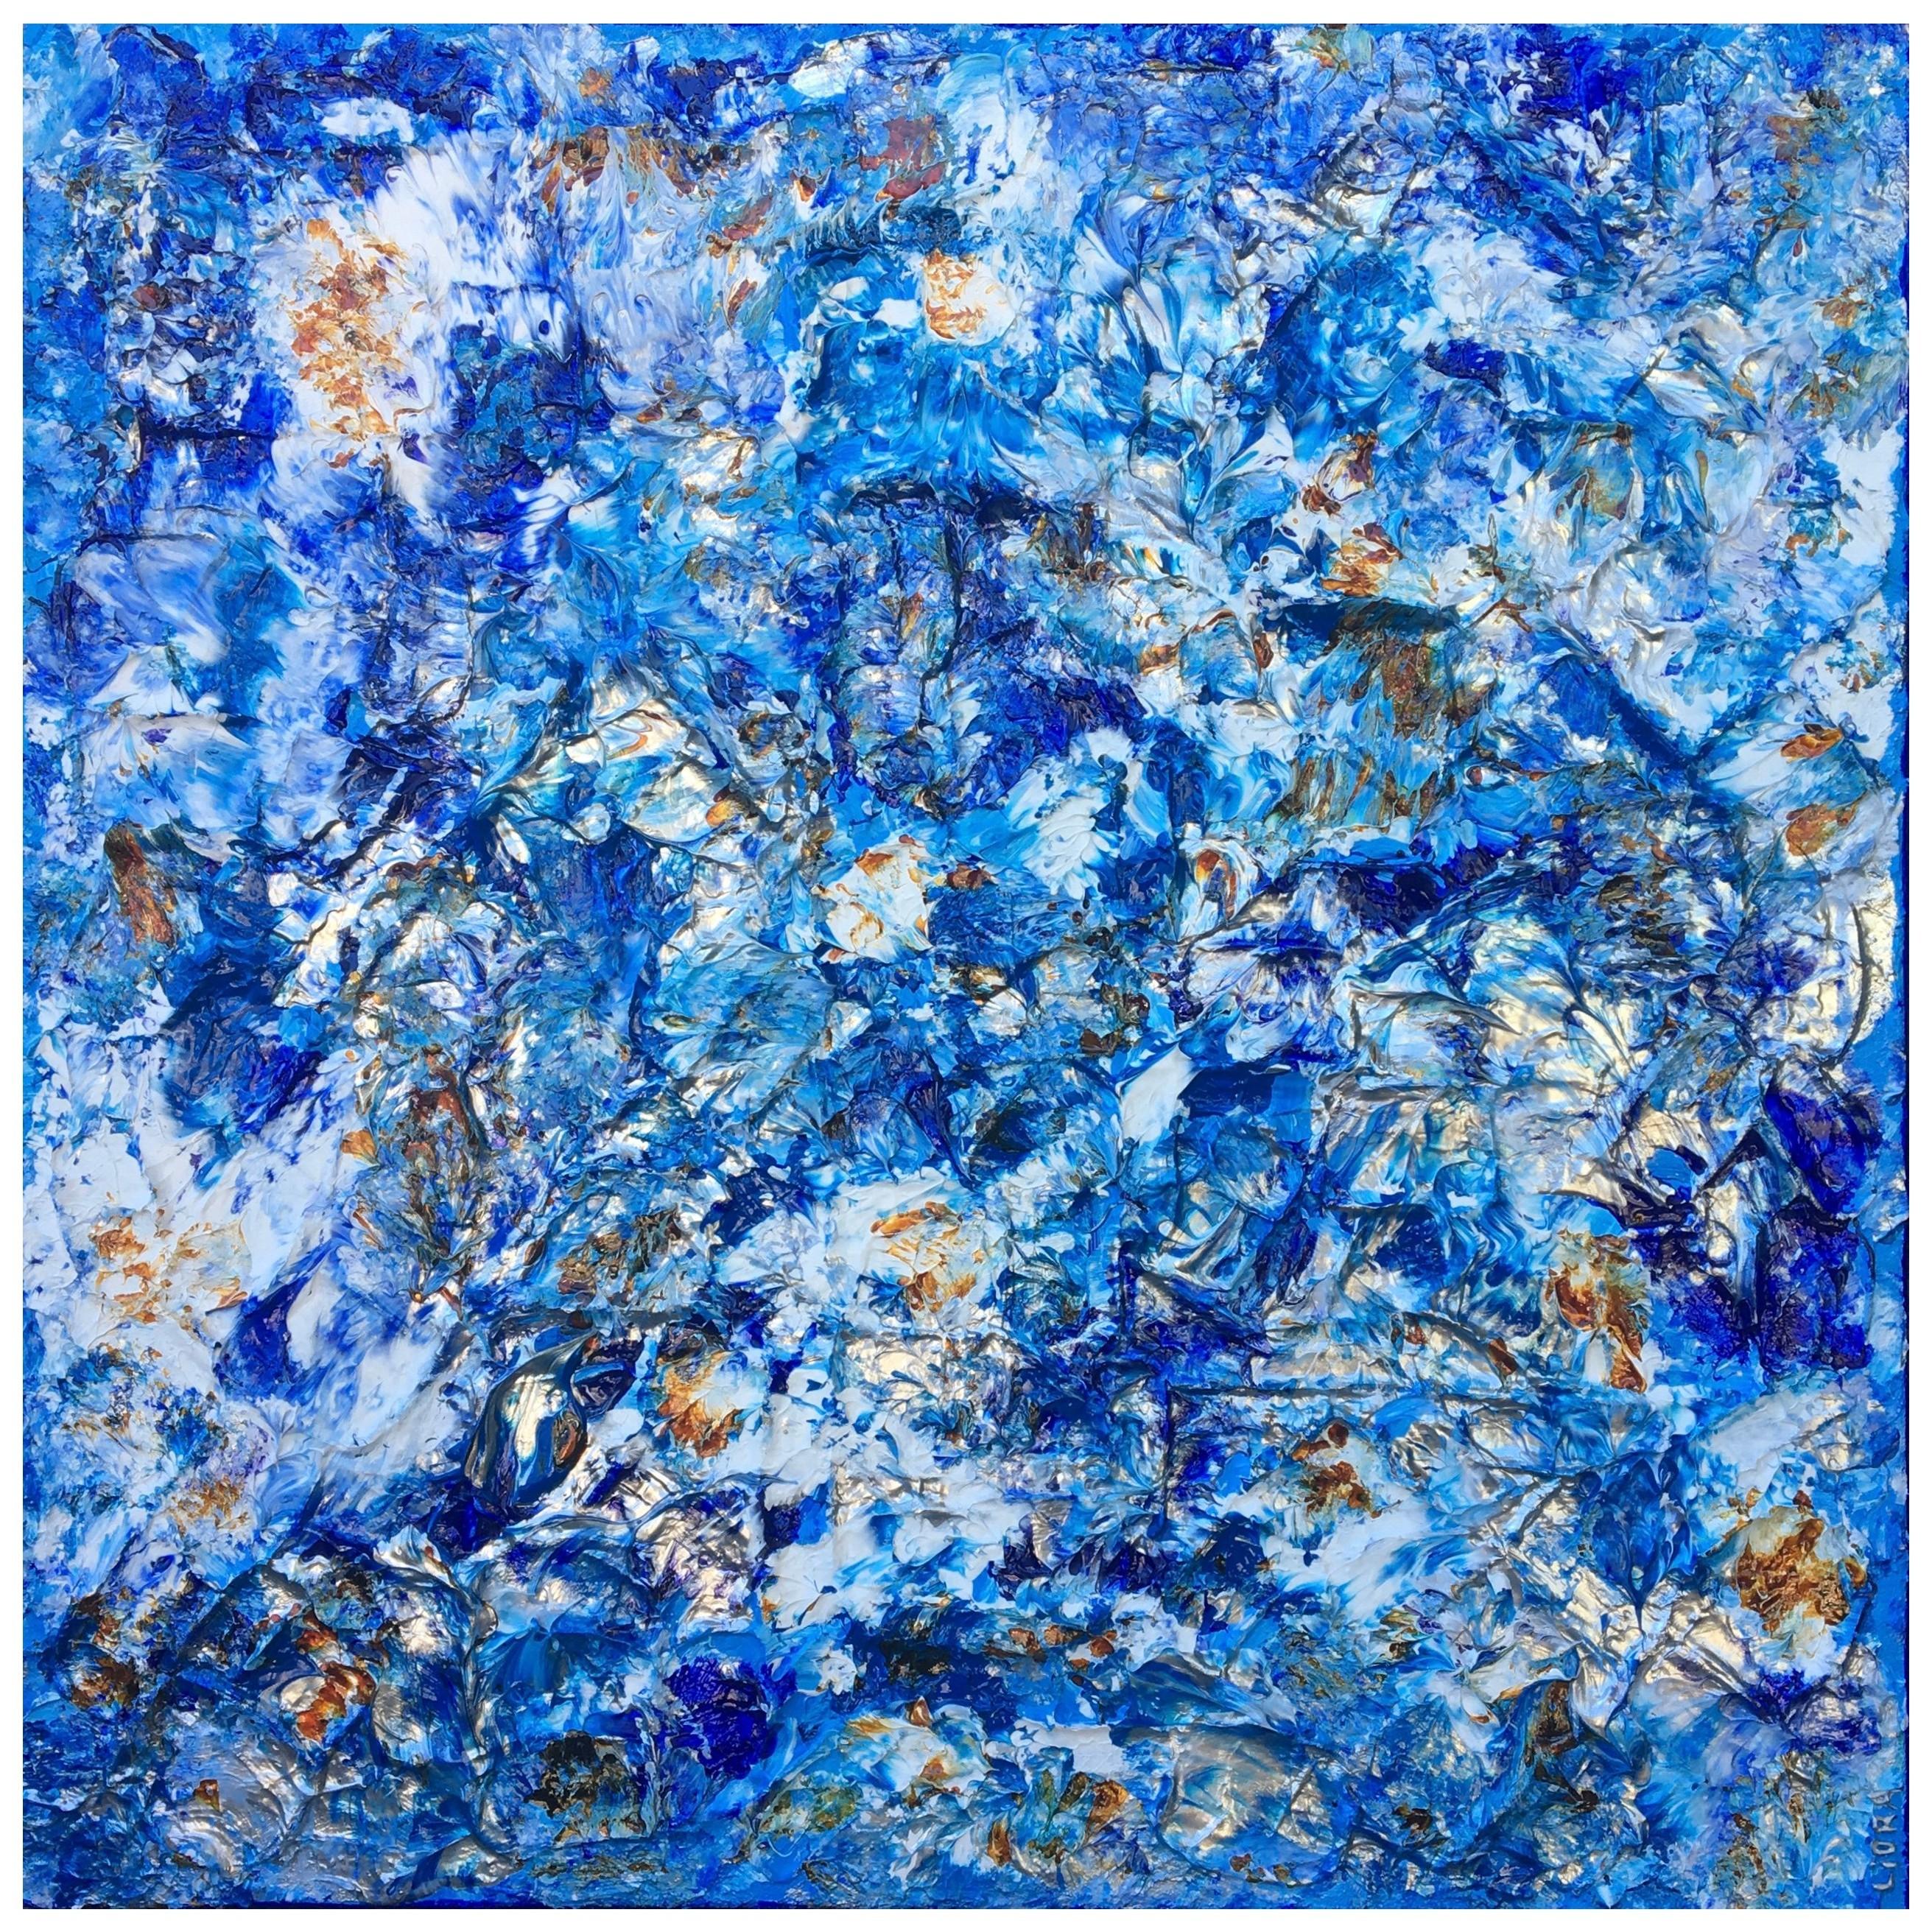 Marina 7 by Liora Textured Blue Large Abstract Canvas Contemporary Painting For Sale